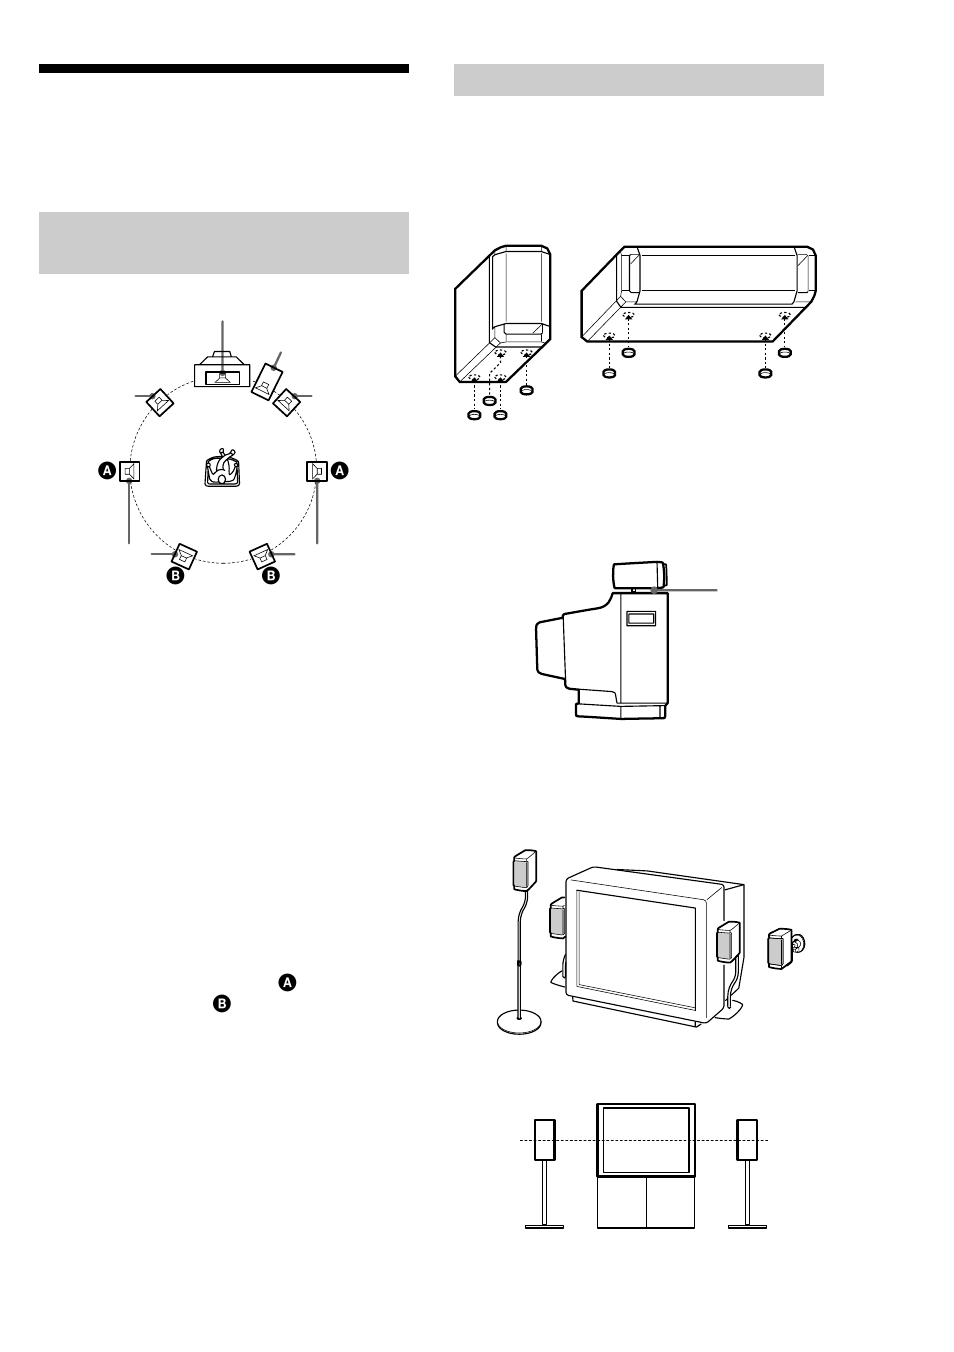 Positioning the speakers, Location of each speaker, Setting the speakers | Sony SA-VE315 Manuel d'utilisation | Page 7 / 24